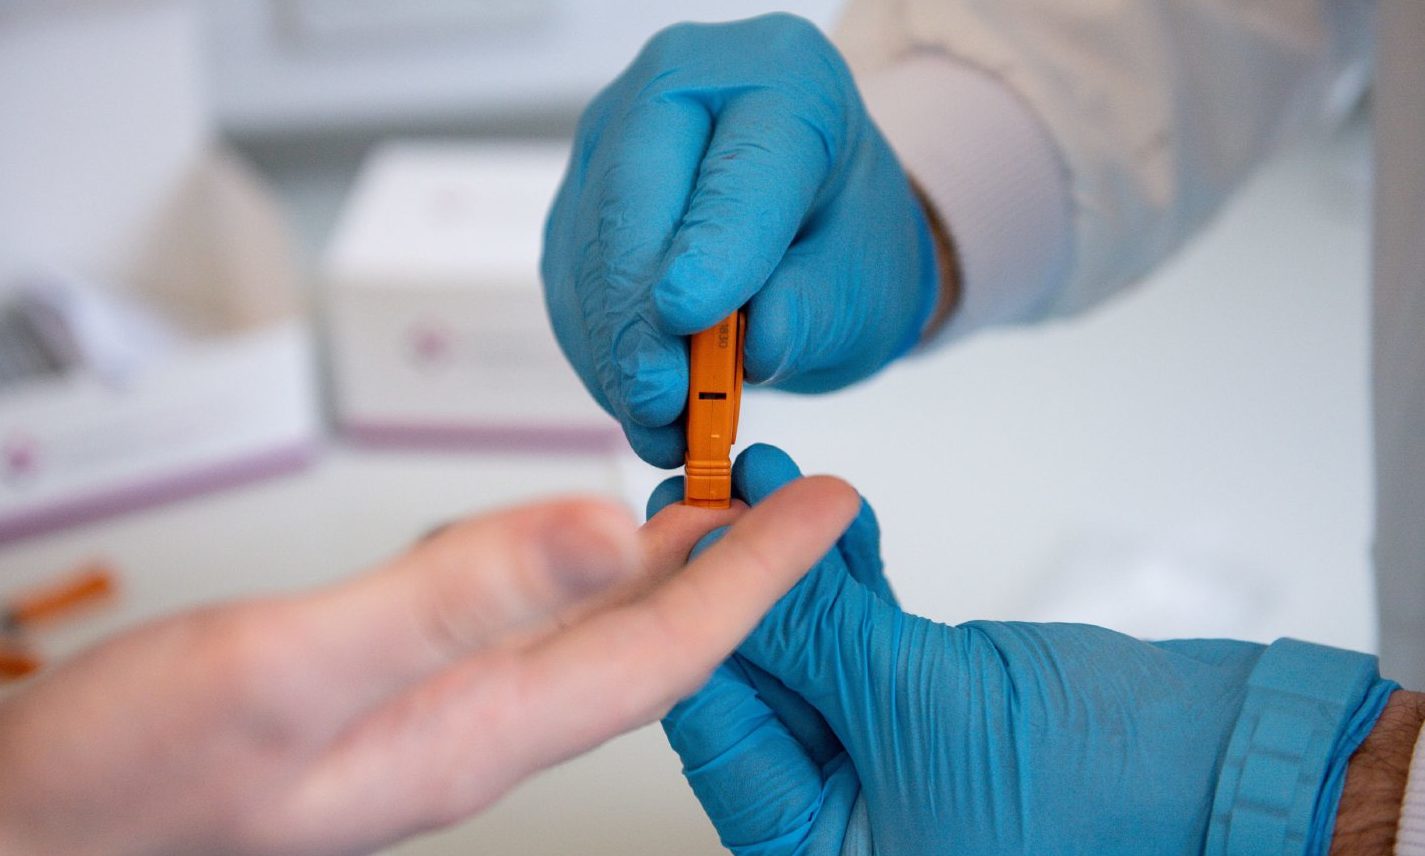 Capillary blood is drawn from a fingertip during a demonstration at SureScreen Diagnostics, based in Derby, of a test they have manufactured which claims to be 98% accurate in determining if a person is infected with coronavirus, costs £6 and can be used in 10 minutes.